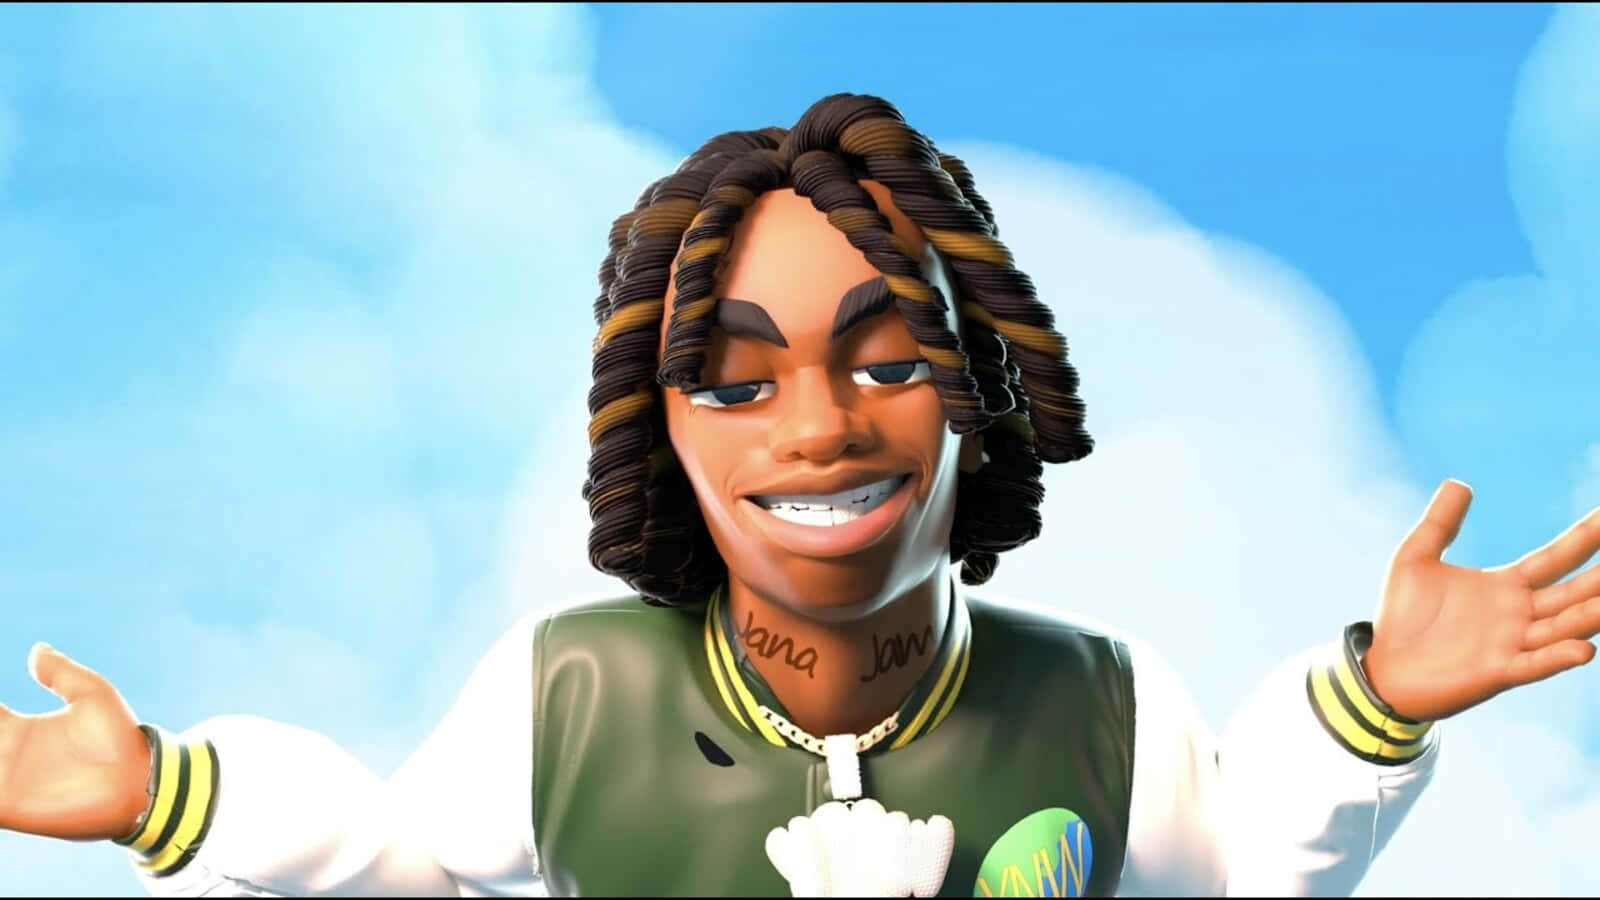 YNW Melly Cartoon Wallpaper - A colorful and vibrant illustration of the rapper in animated style Wallpaper